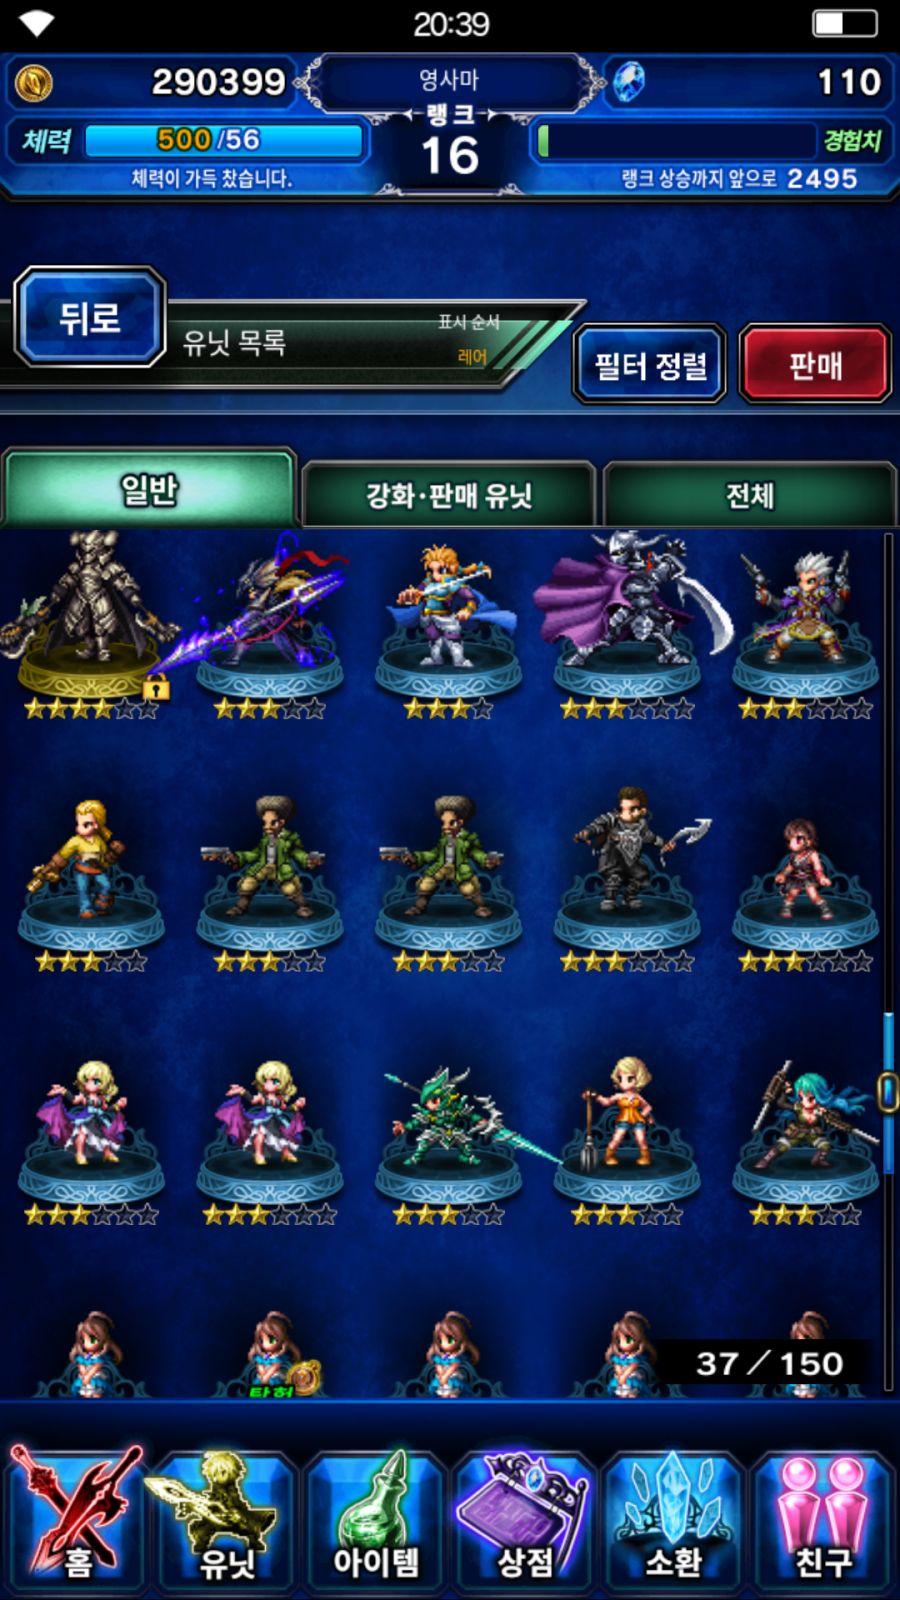 Screenshot_2019-04-25-20-39-27-975_com.square_enix.android_googleplay.FFBEWW.png